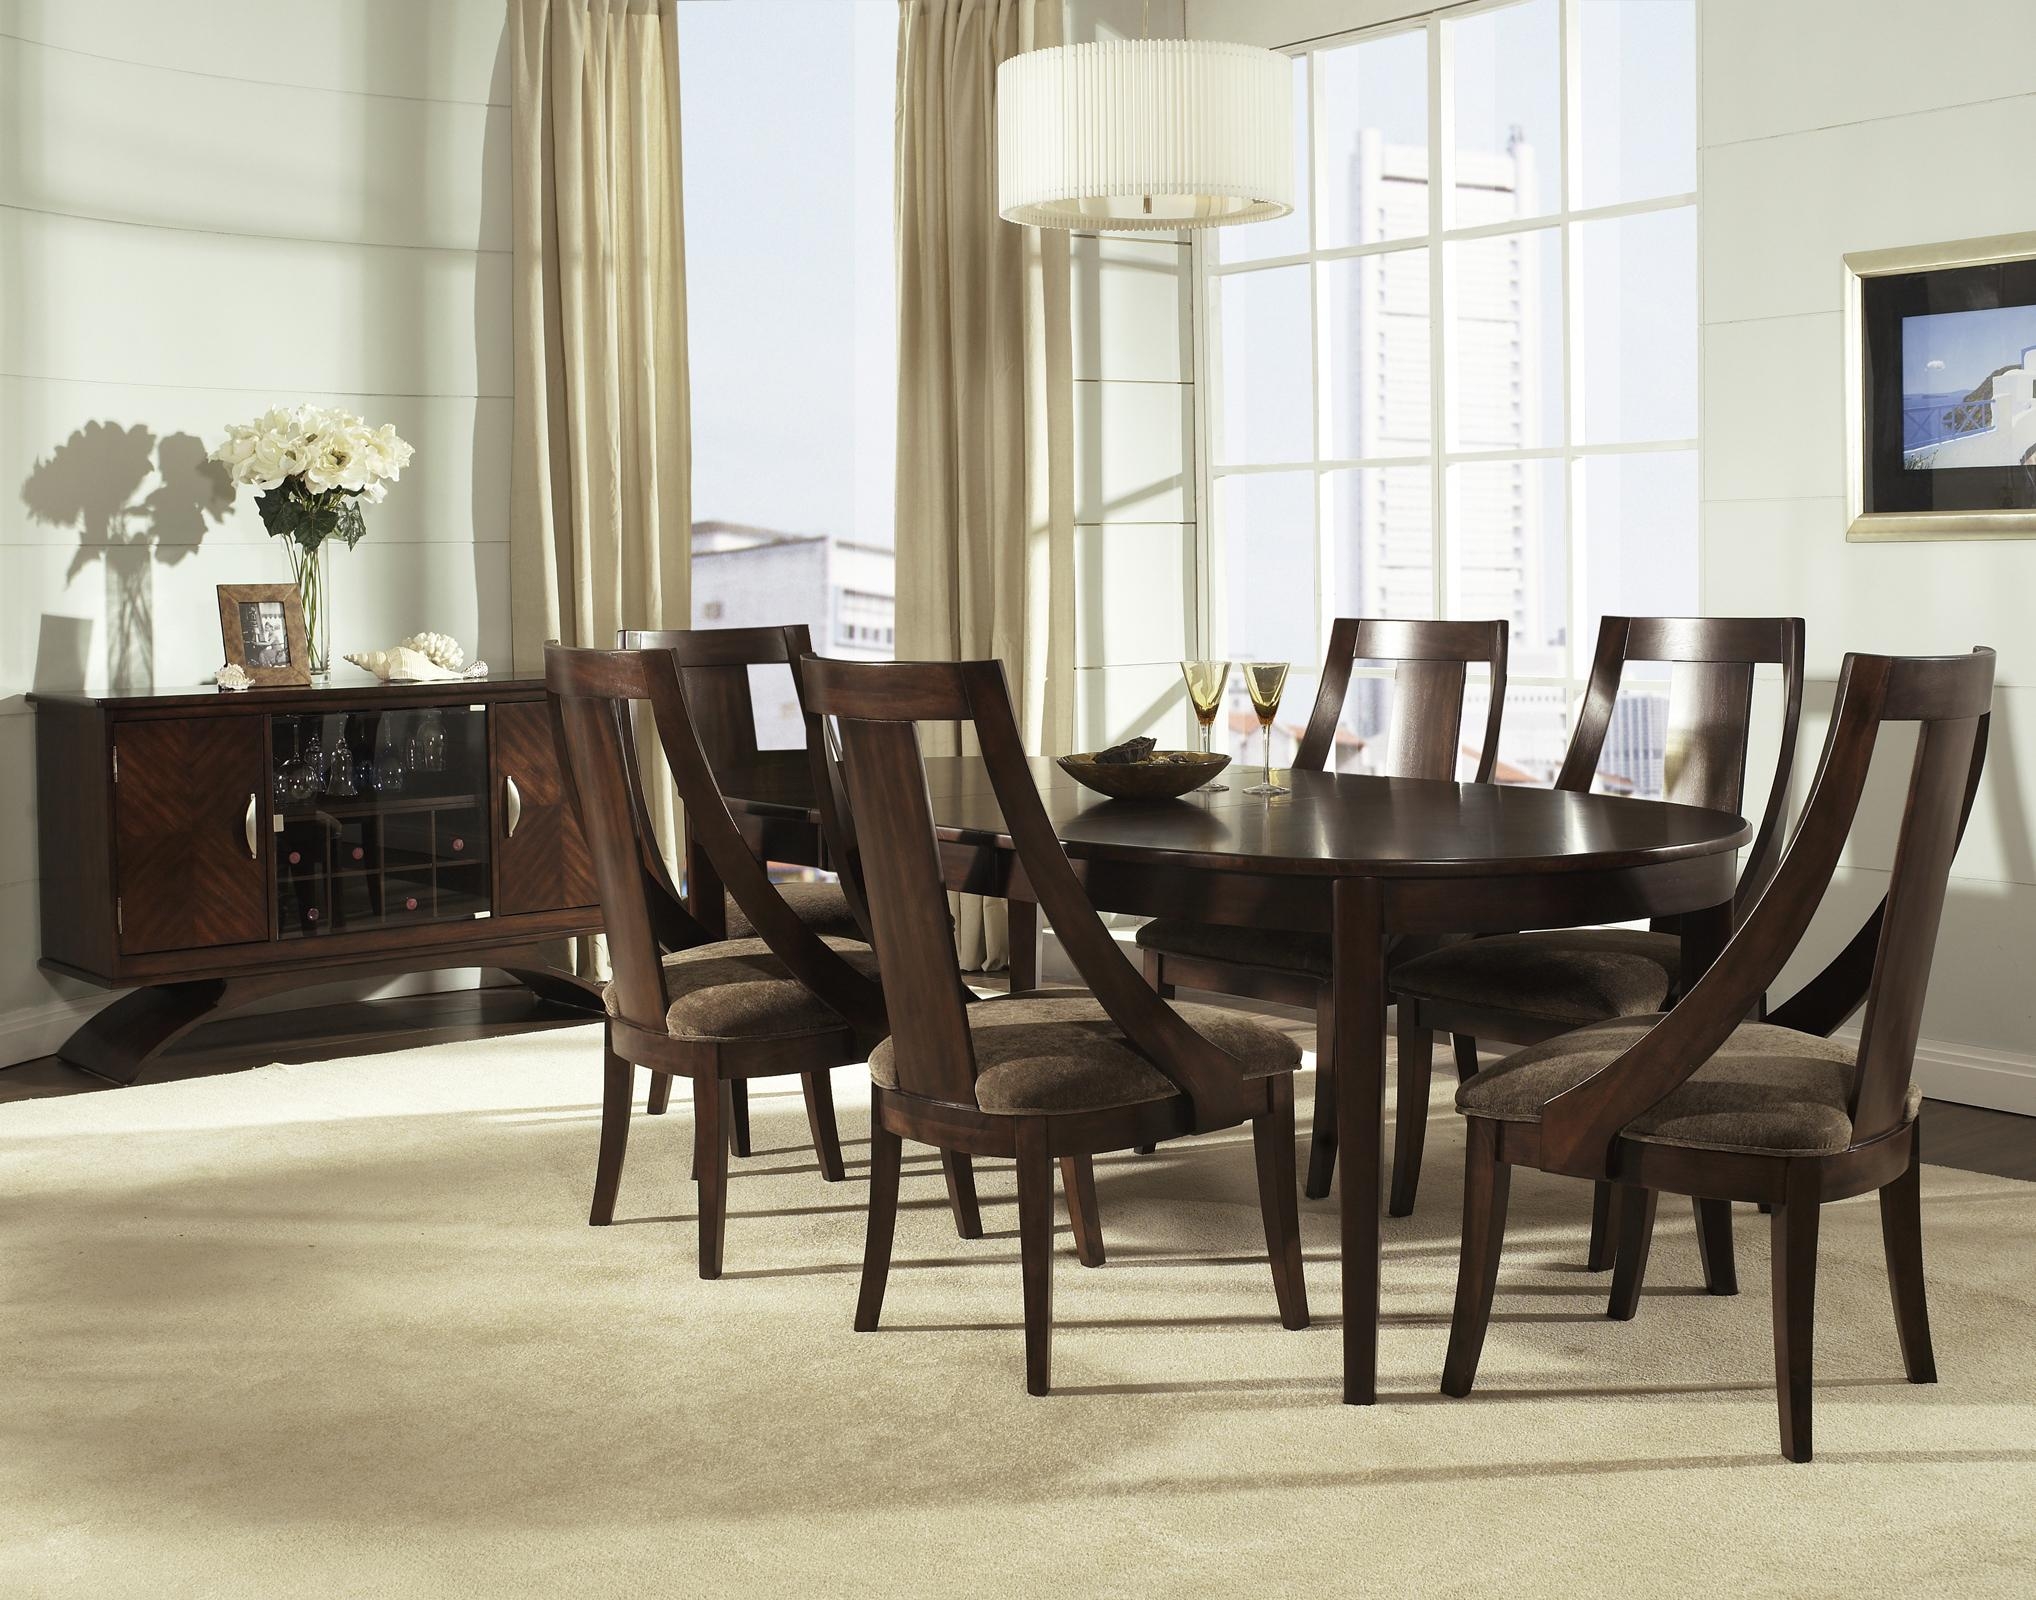 Oval dining table for 6 8